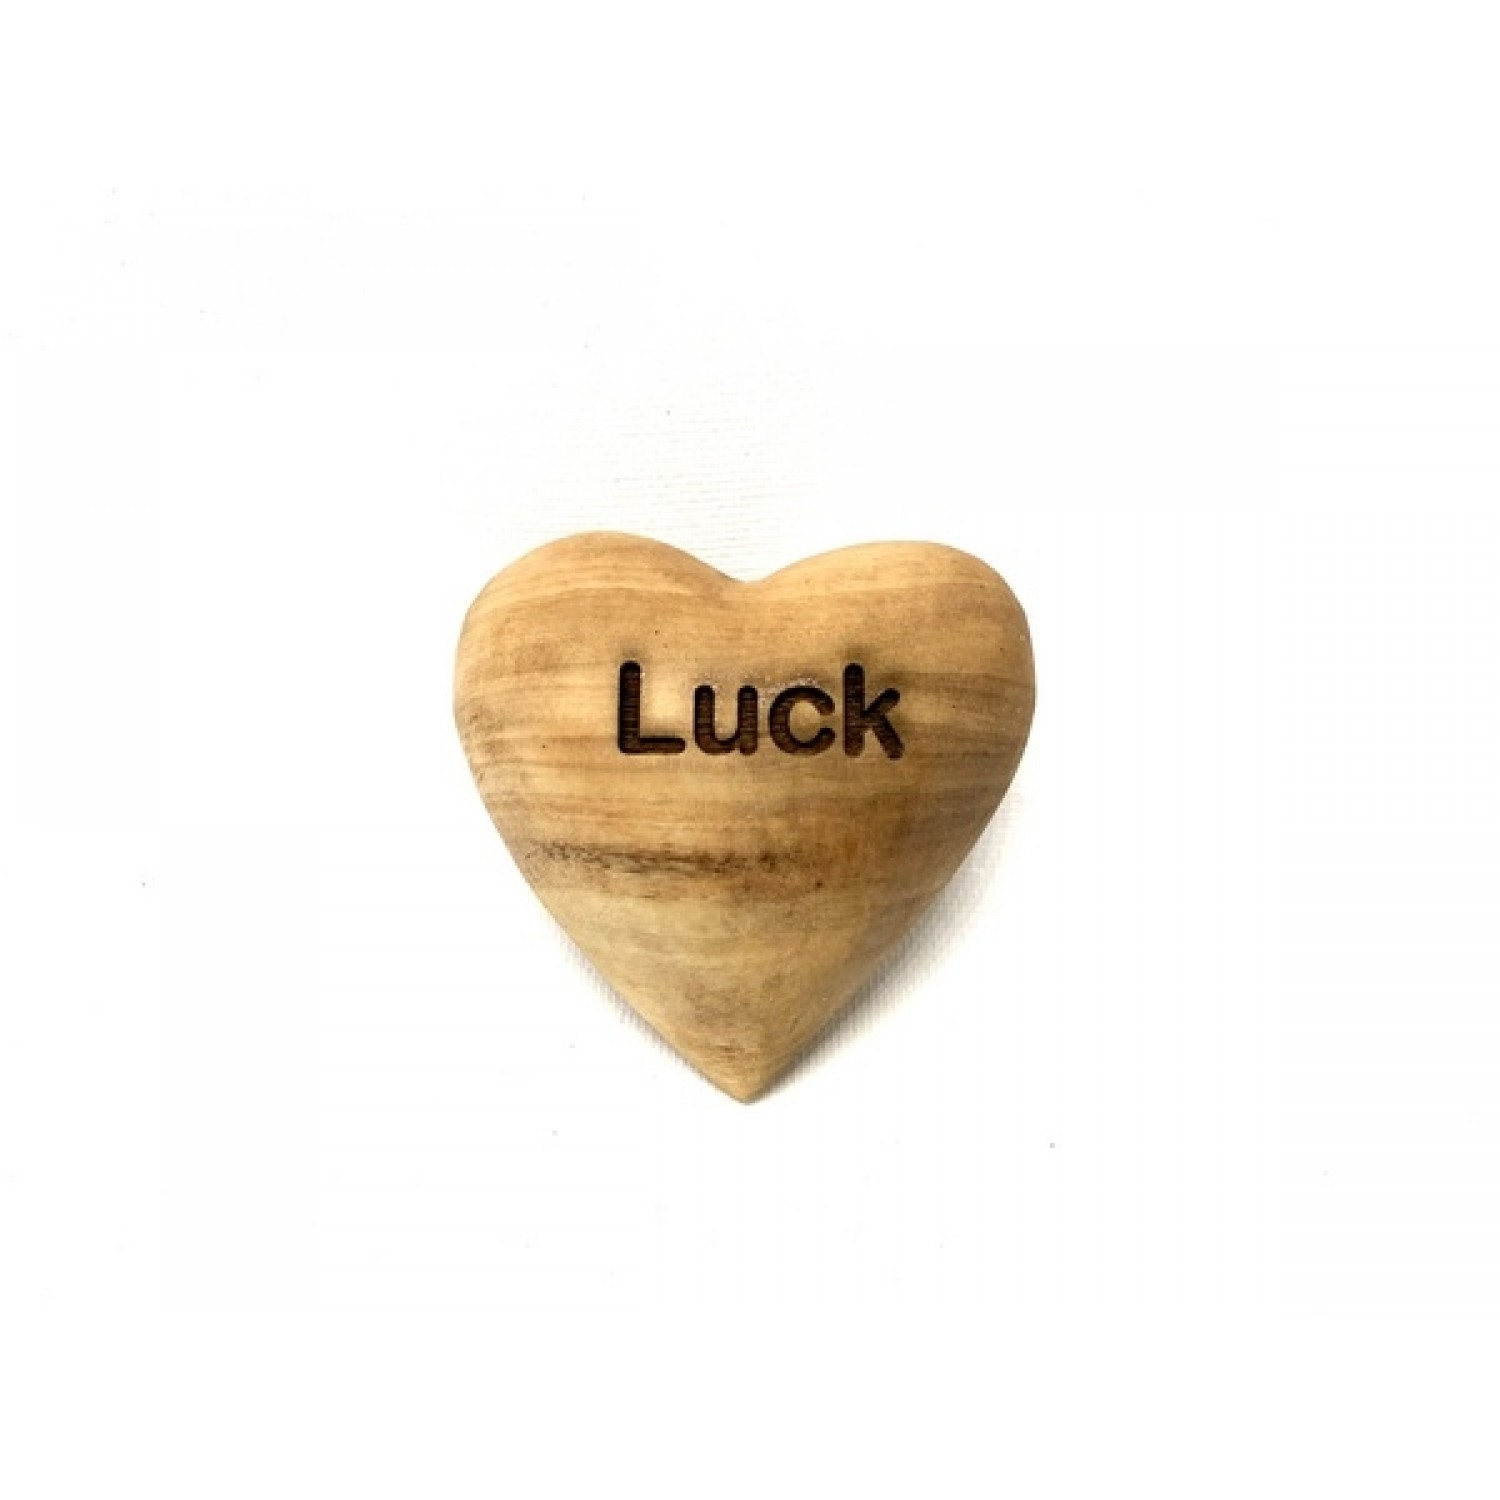 Engraved Solid Olive Wood Heart with inspiring Stroke – Luck